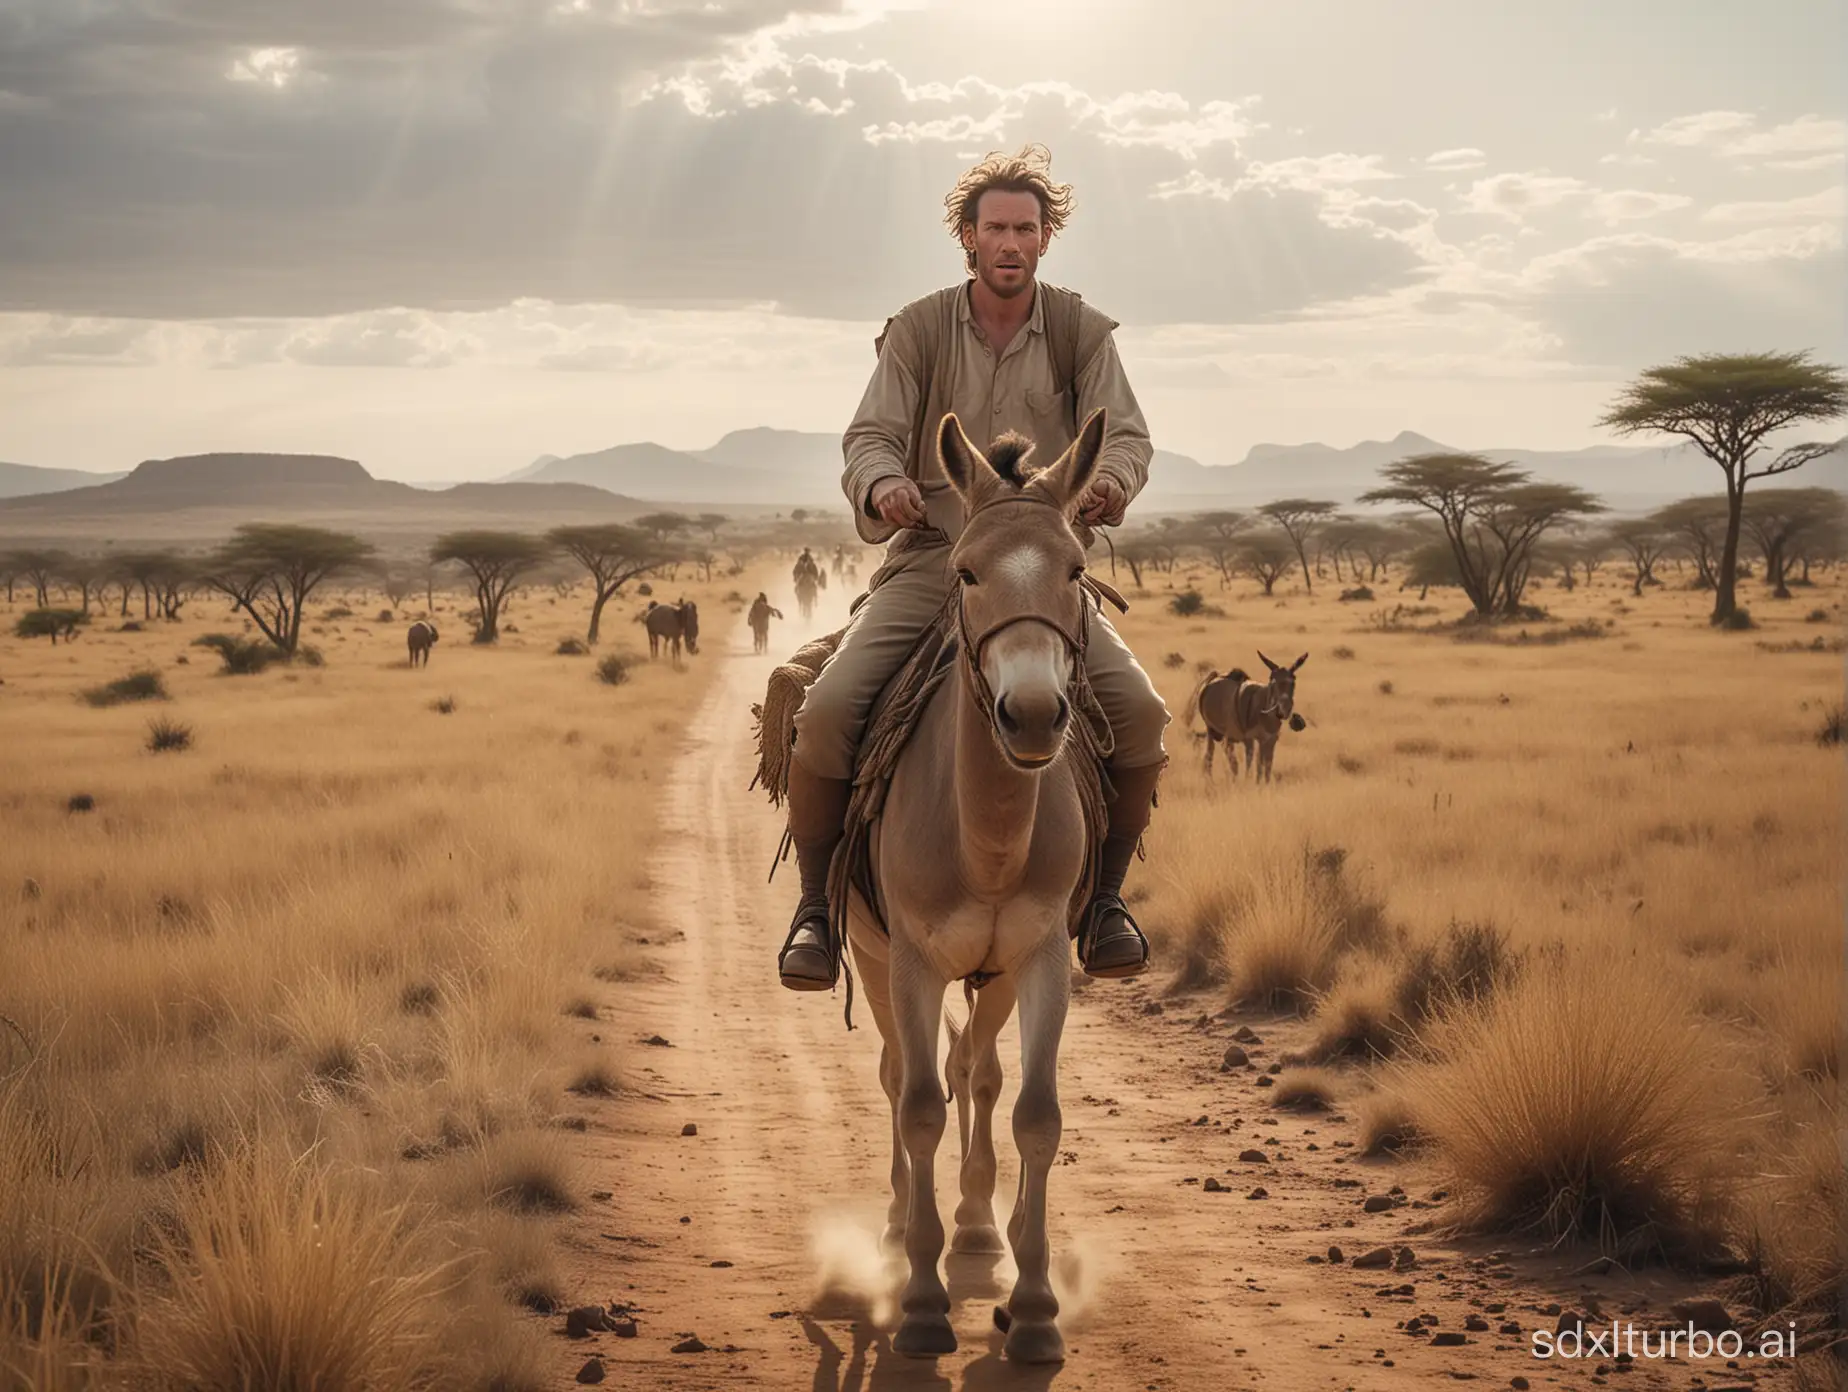 Cinematic image of a white man riding his donkey trough the african plains. Both the donkey and man are facing the camera